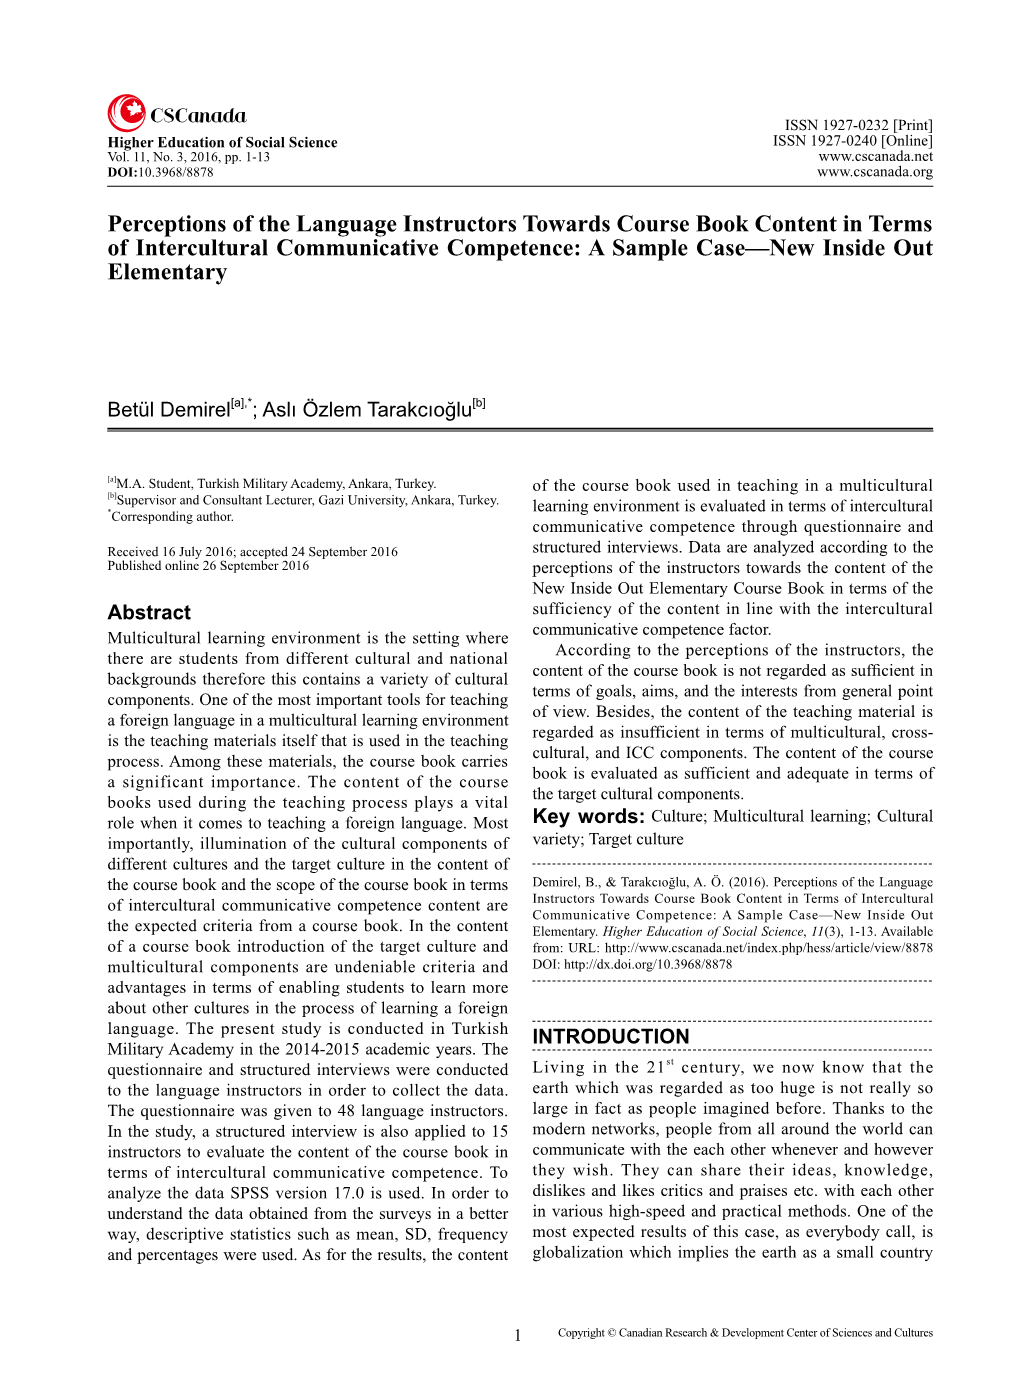 Perceptions of the Language Instructors Towards Course Book Content in Terms of Intercultural Communicative Competence: a Sample Case—New Inside out Elementary